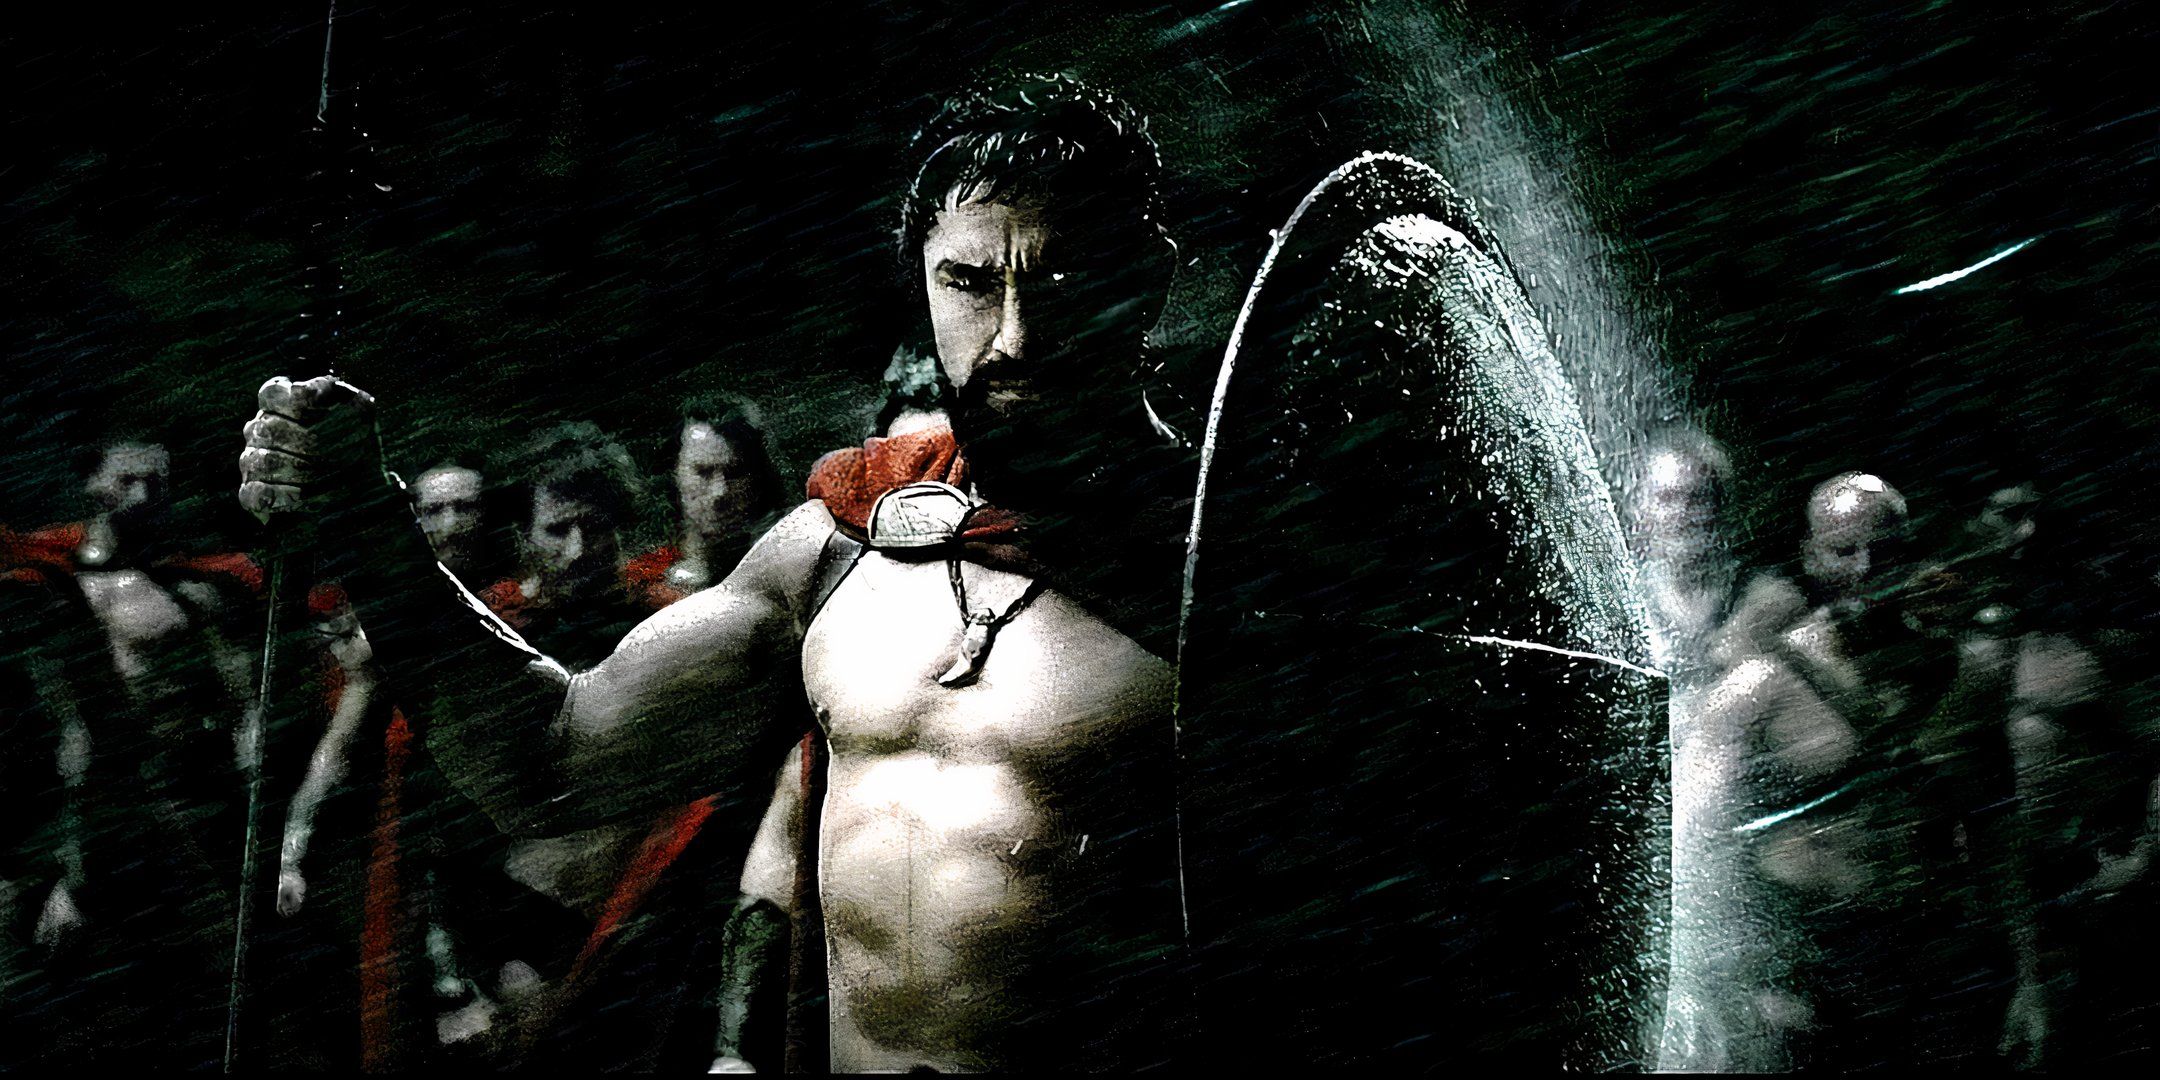 Gerard Butler as King Leonidas holding his shield against the rain in 300